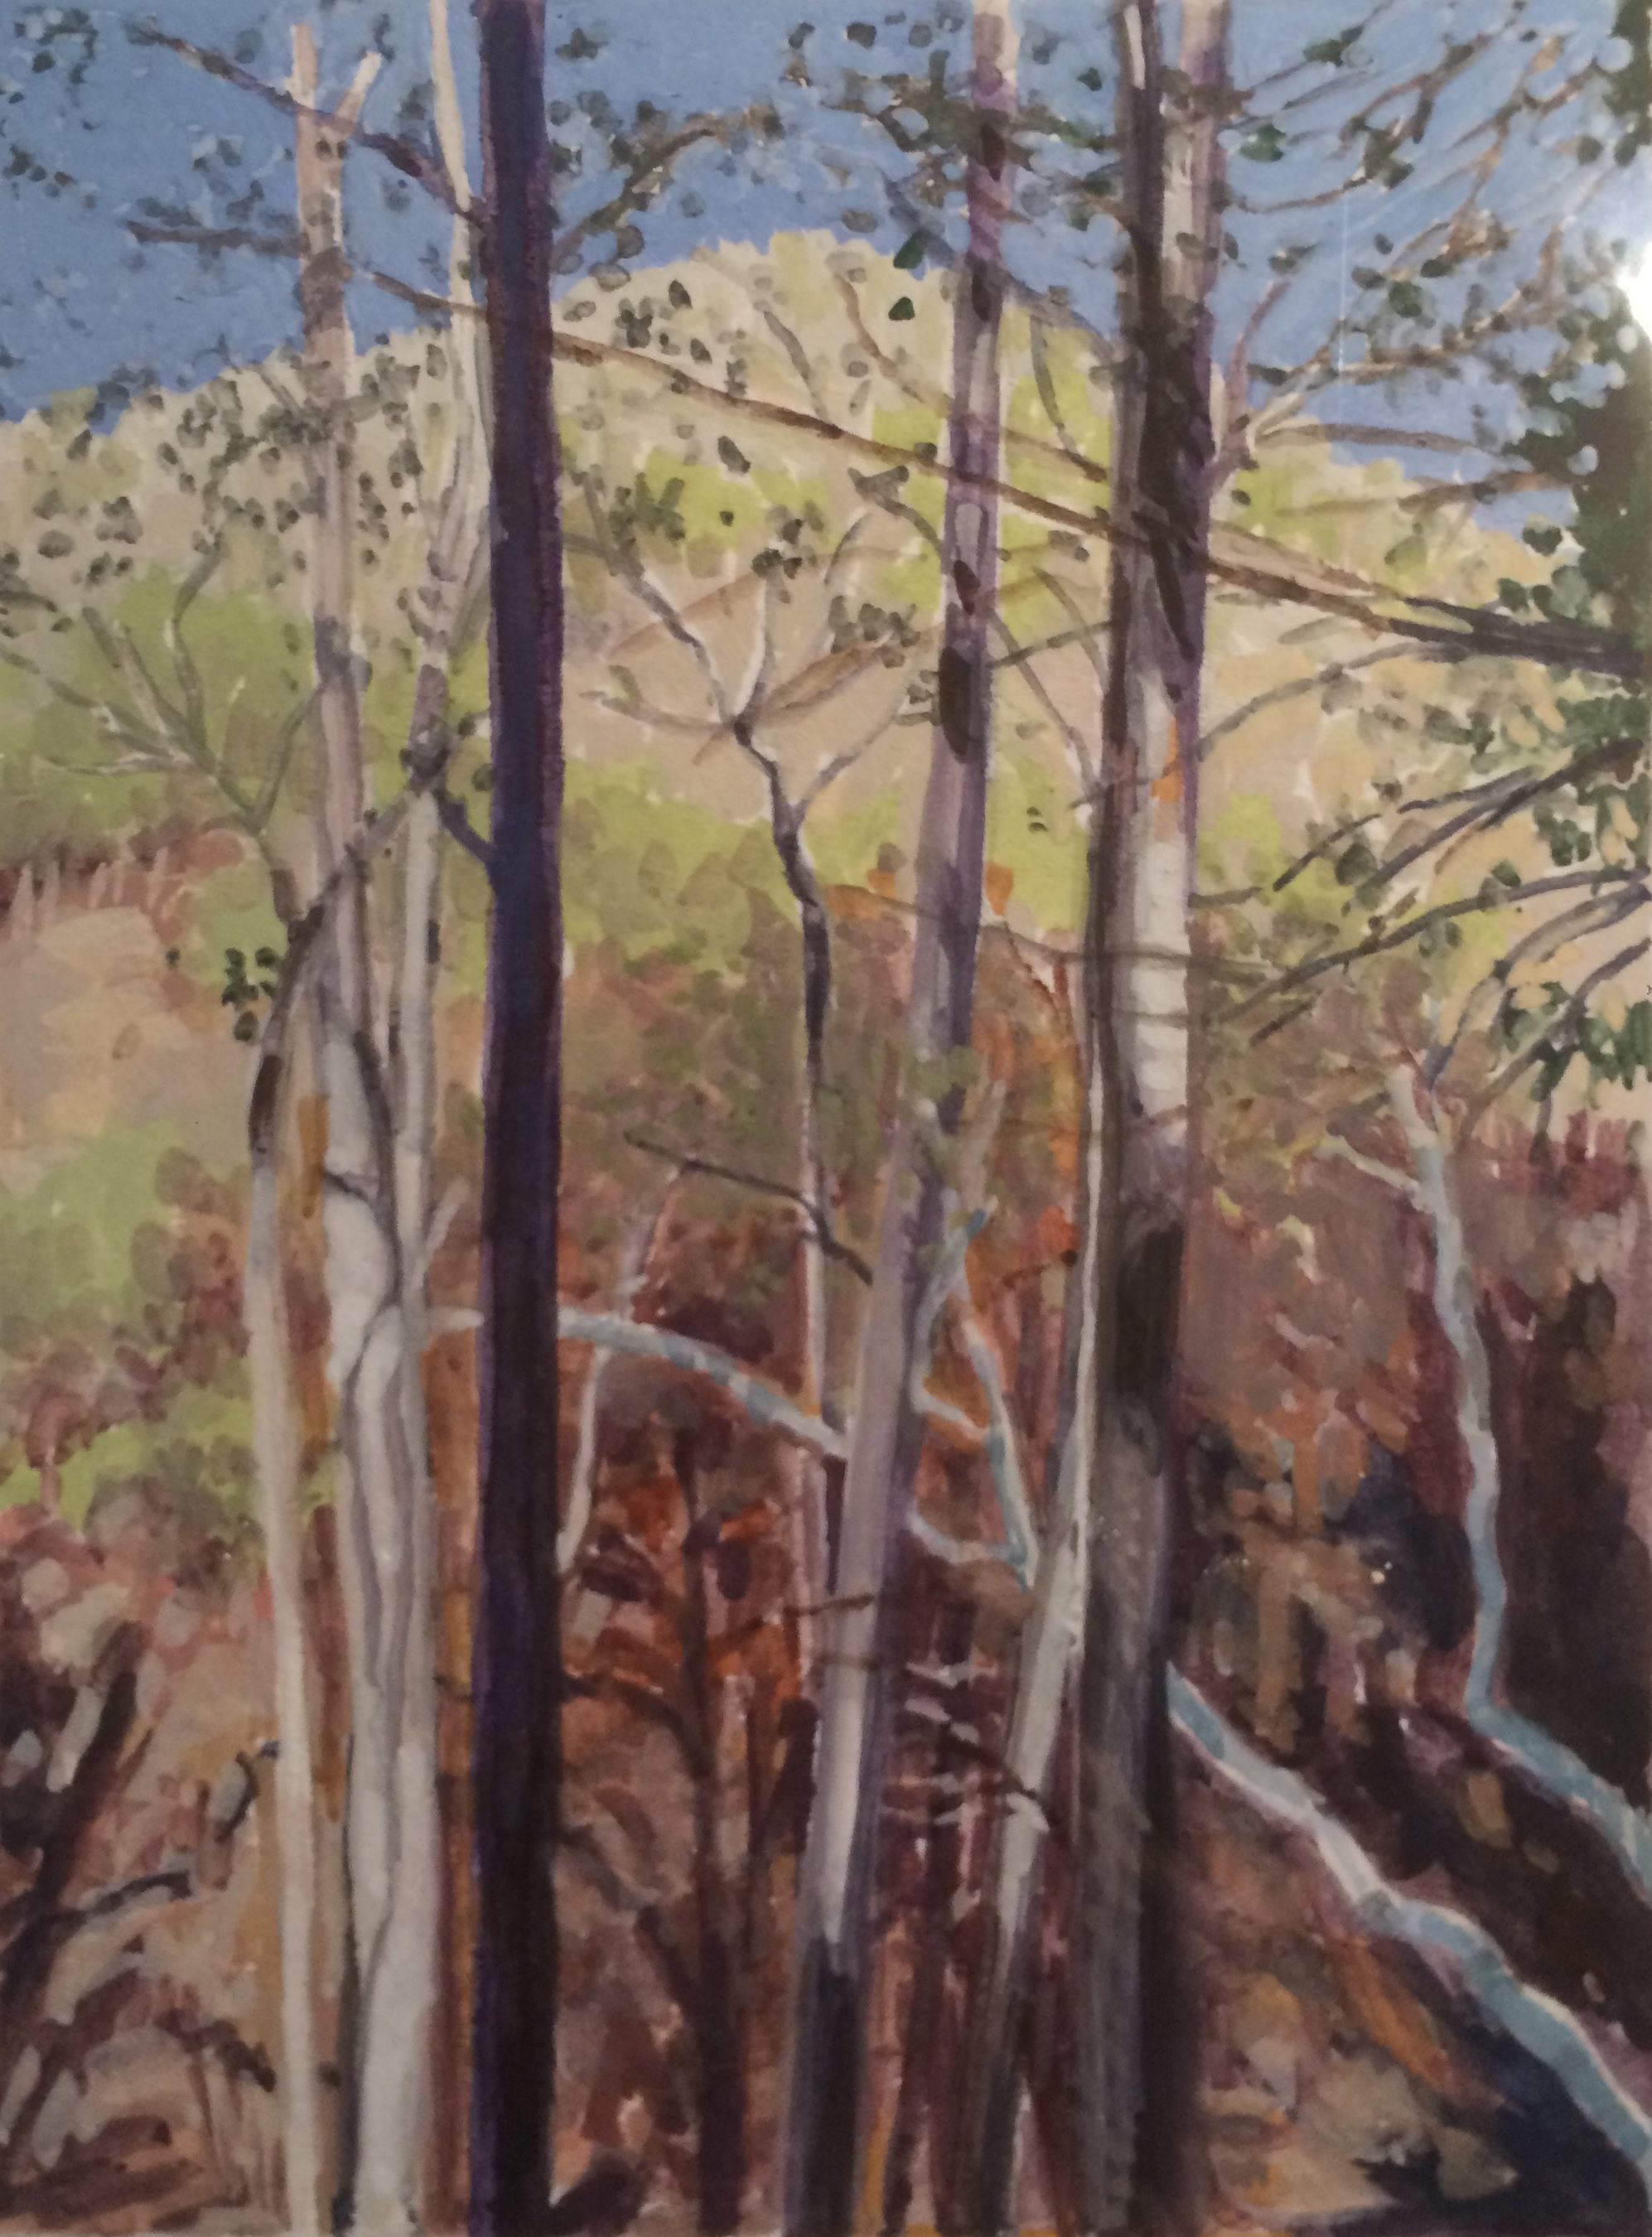 Wildling to host gouache painting workshop